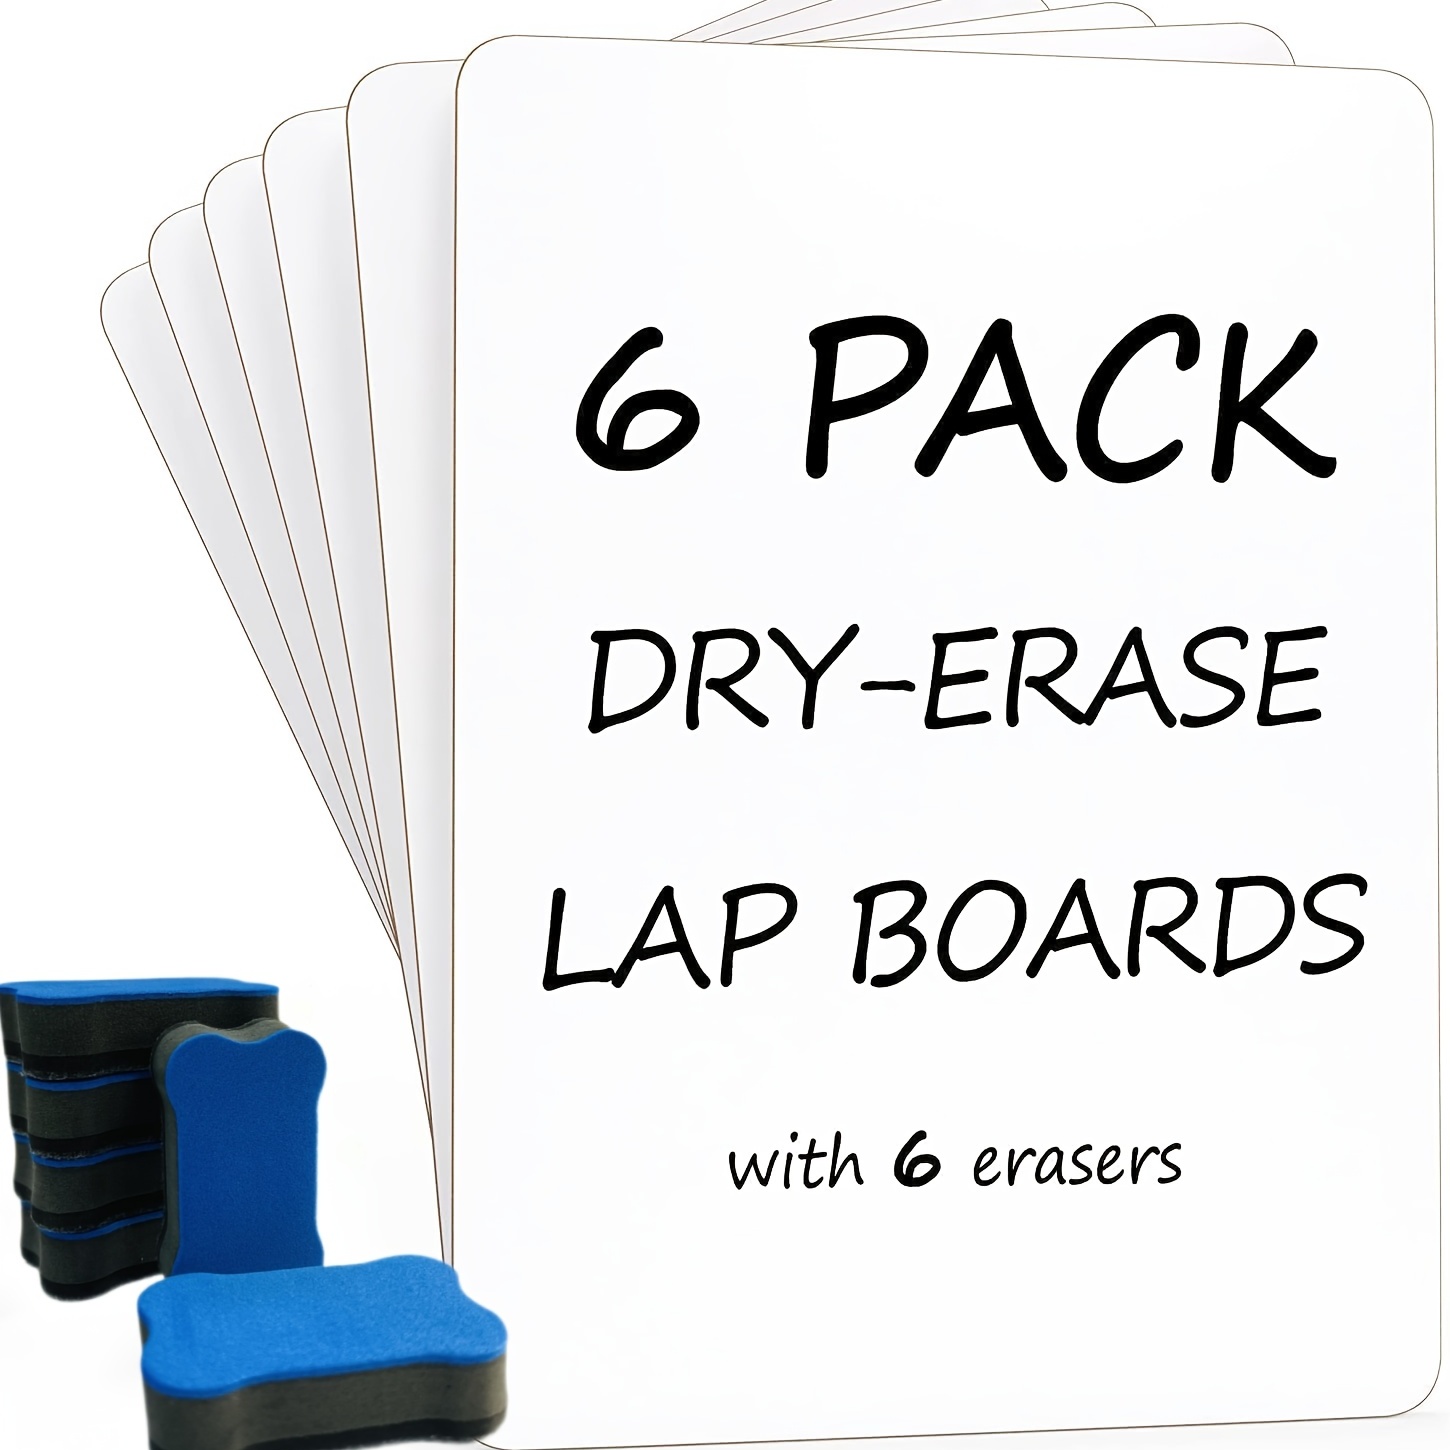 

6 Packs Small White Board Dry Erase Boards Classroom Pack Mini White Boards 9"x12" Personal Whiteboards For Teachers School Supplies Lapboards L 6 Mini Whiteboard Erasers Included